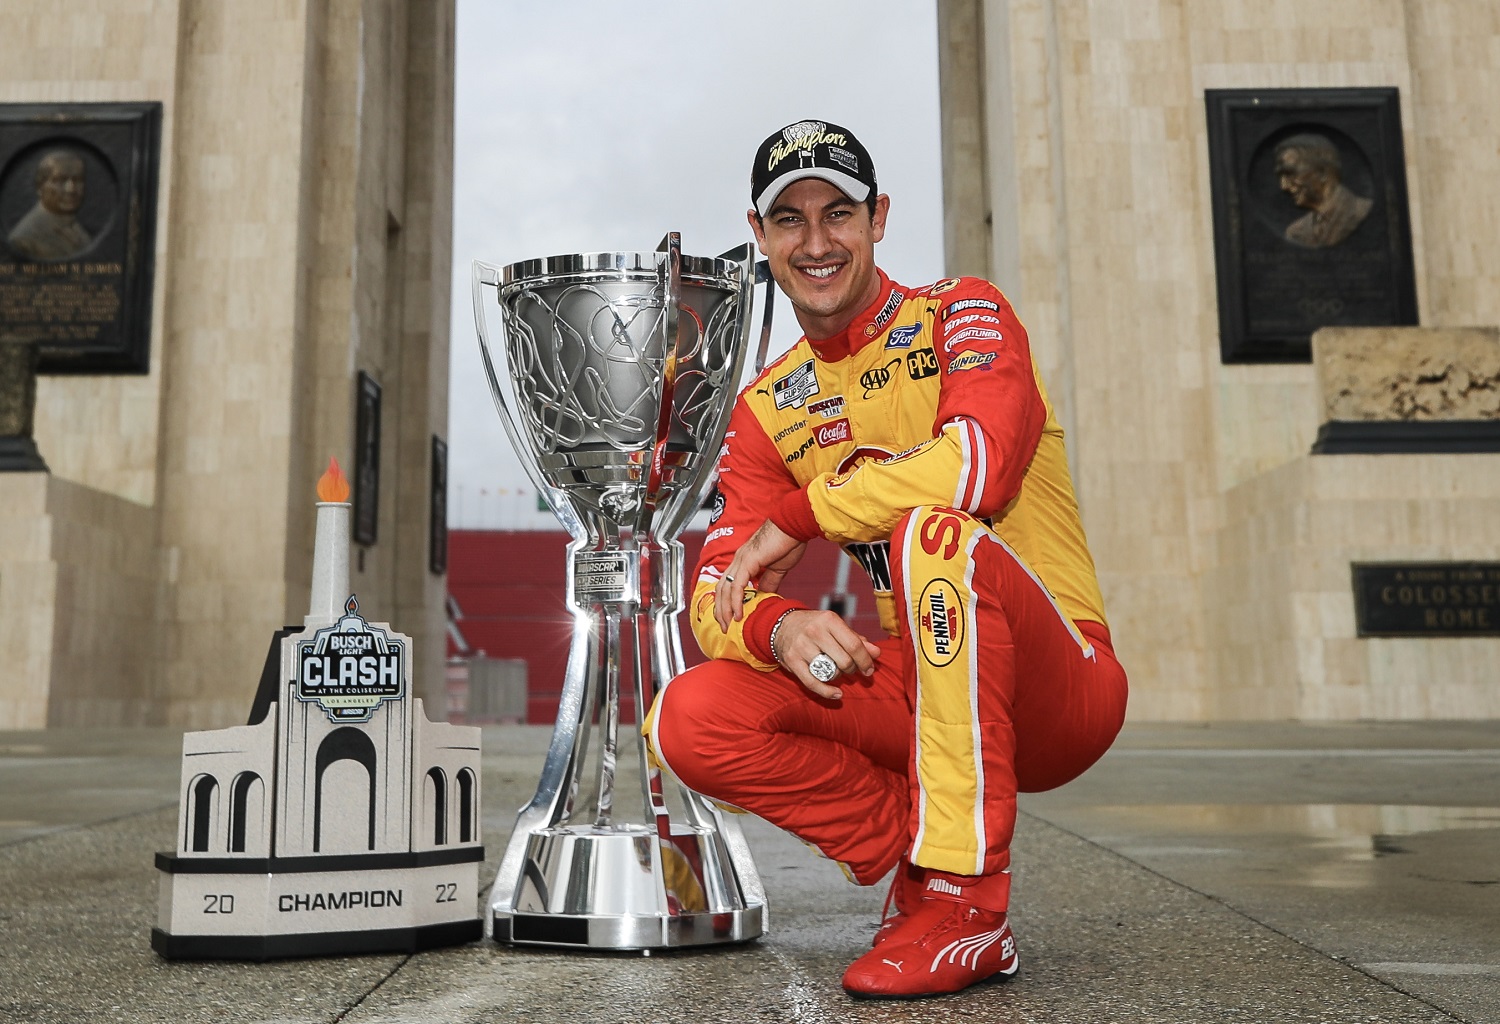 Joey Logano poses with the Bill France NASCAR Cup Series Championship trophy and his NASCAR Clash at the Coliseum trophy at LA Memorial Coliseum on Nov. 8, 2022. | Meg Oliphant/Getty Images